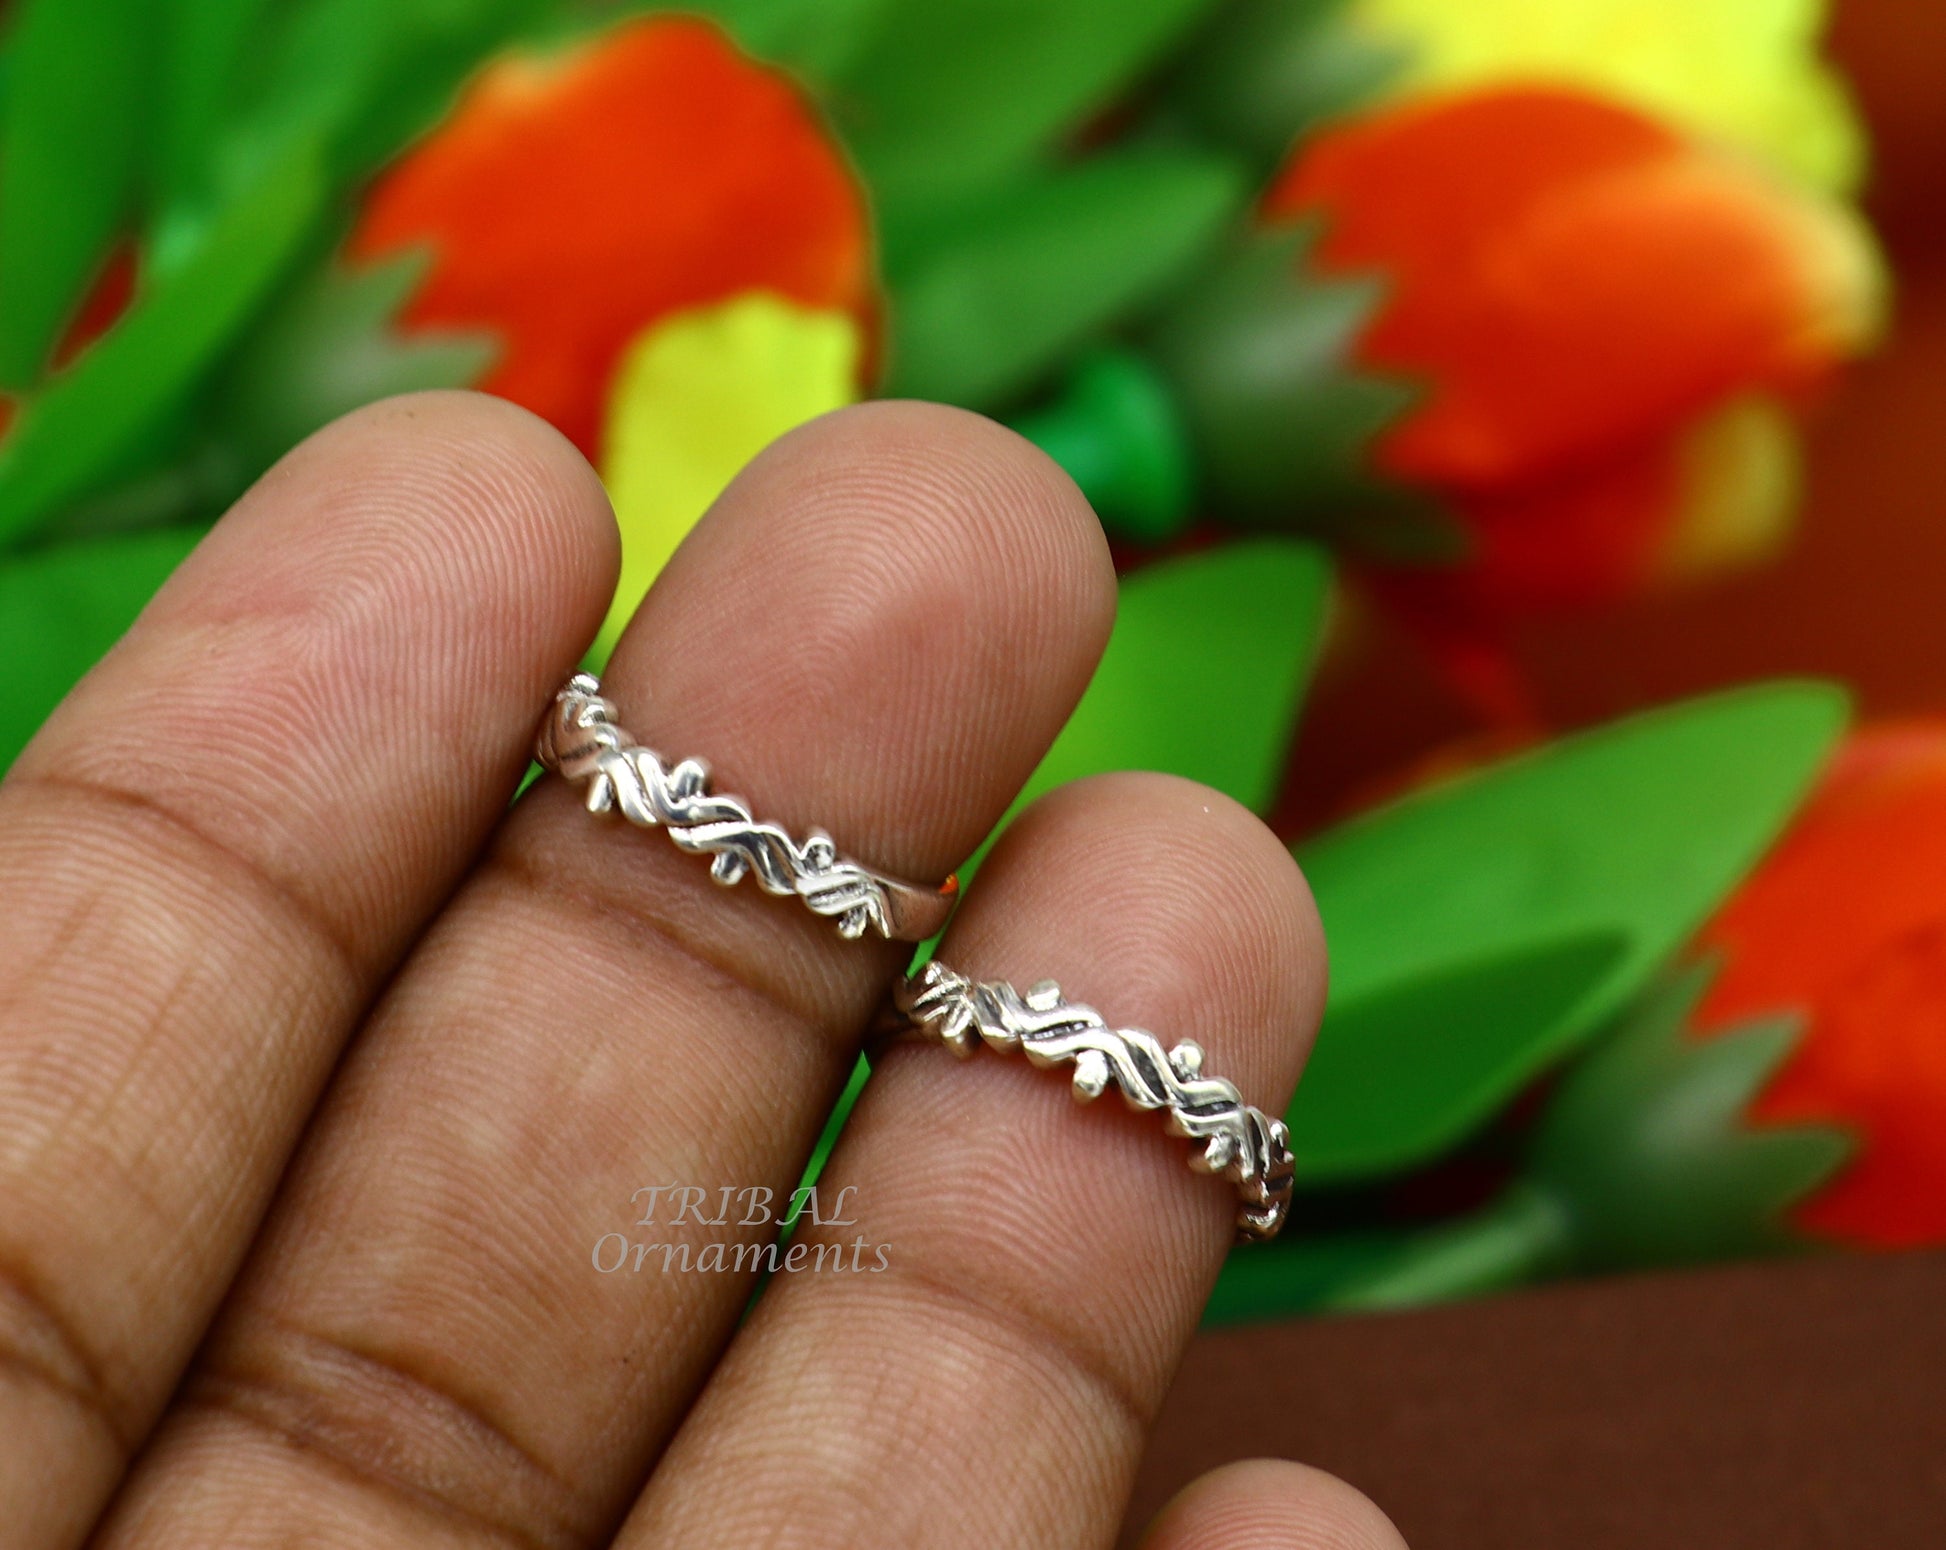 Unique design handcrafted 925 solid sterling silver toe ring, best brides personalized jewelry, wedding ethnic jewelry ytr20 - TRIBAL ORNAMENTS